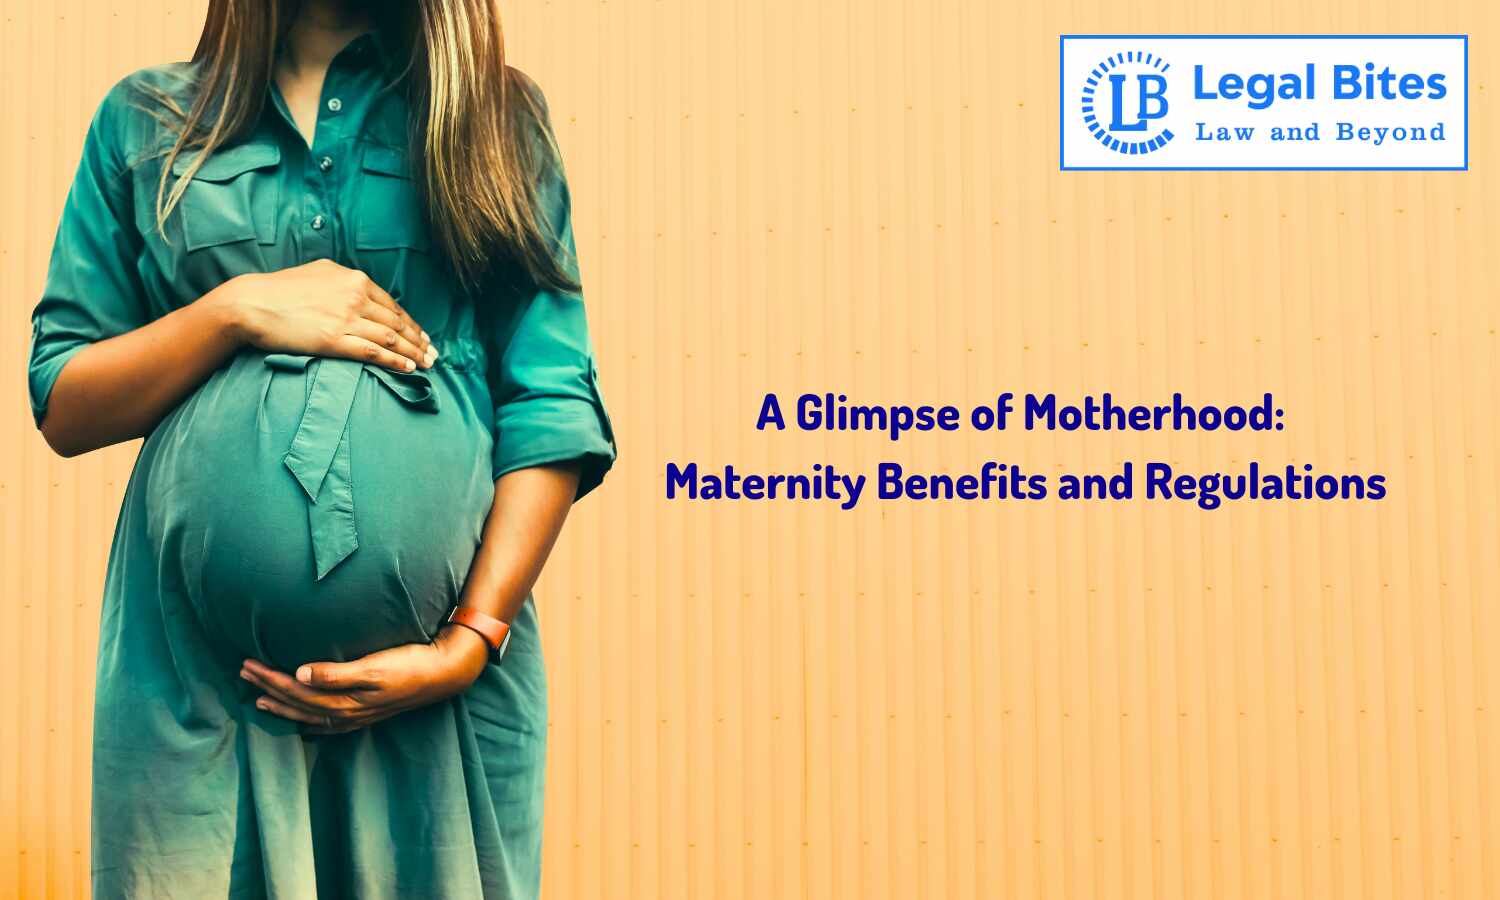 https://www.legalbites.in/h-upload/2023/07/11/1600x960_793855-a-glimpse-of-motherhood-maternity-benefits-and-regulations.jpg